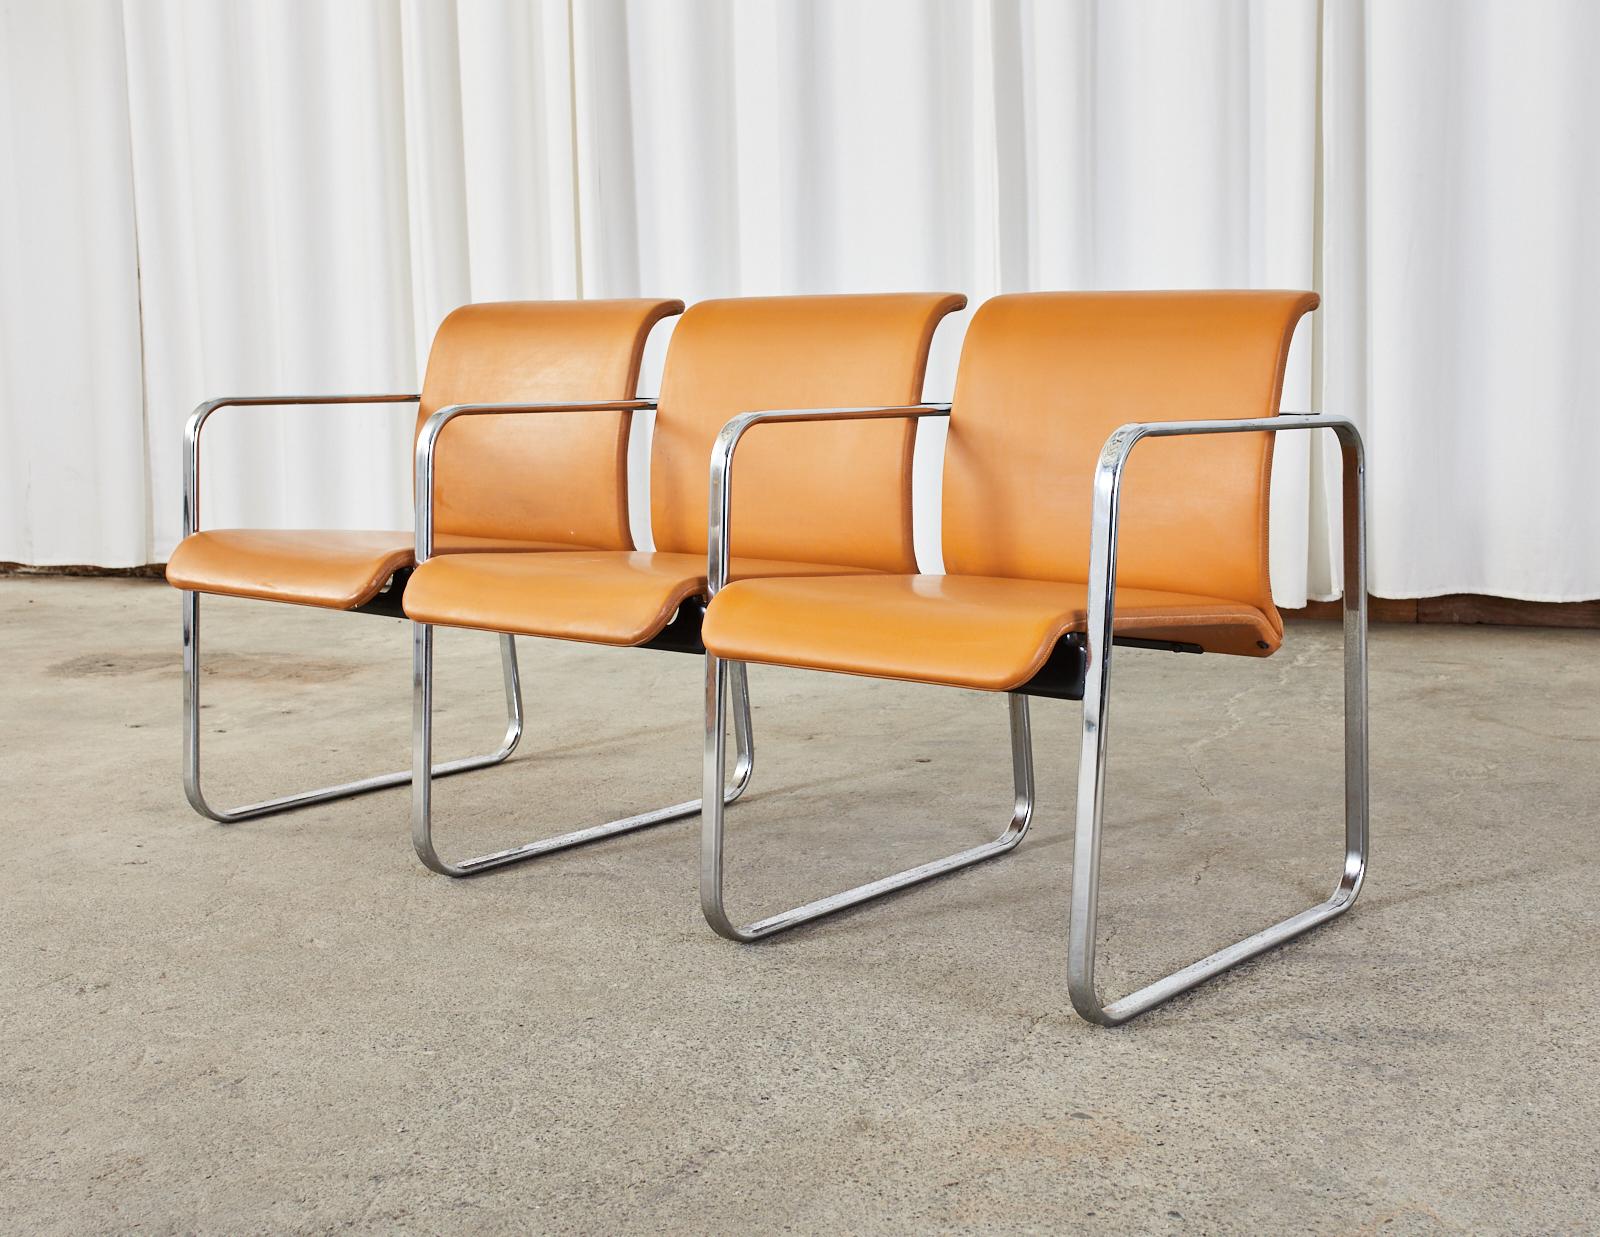 American Midcentury Three Seat Tandem Chairs Peter Protzman Herman Miller For Sale